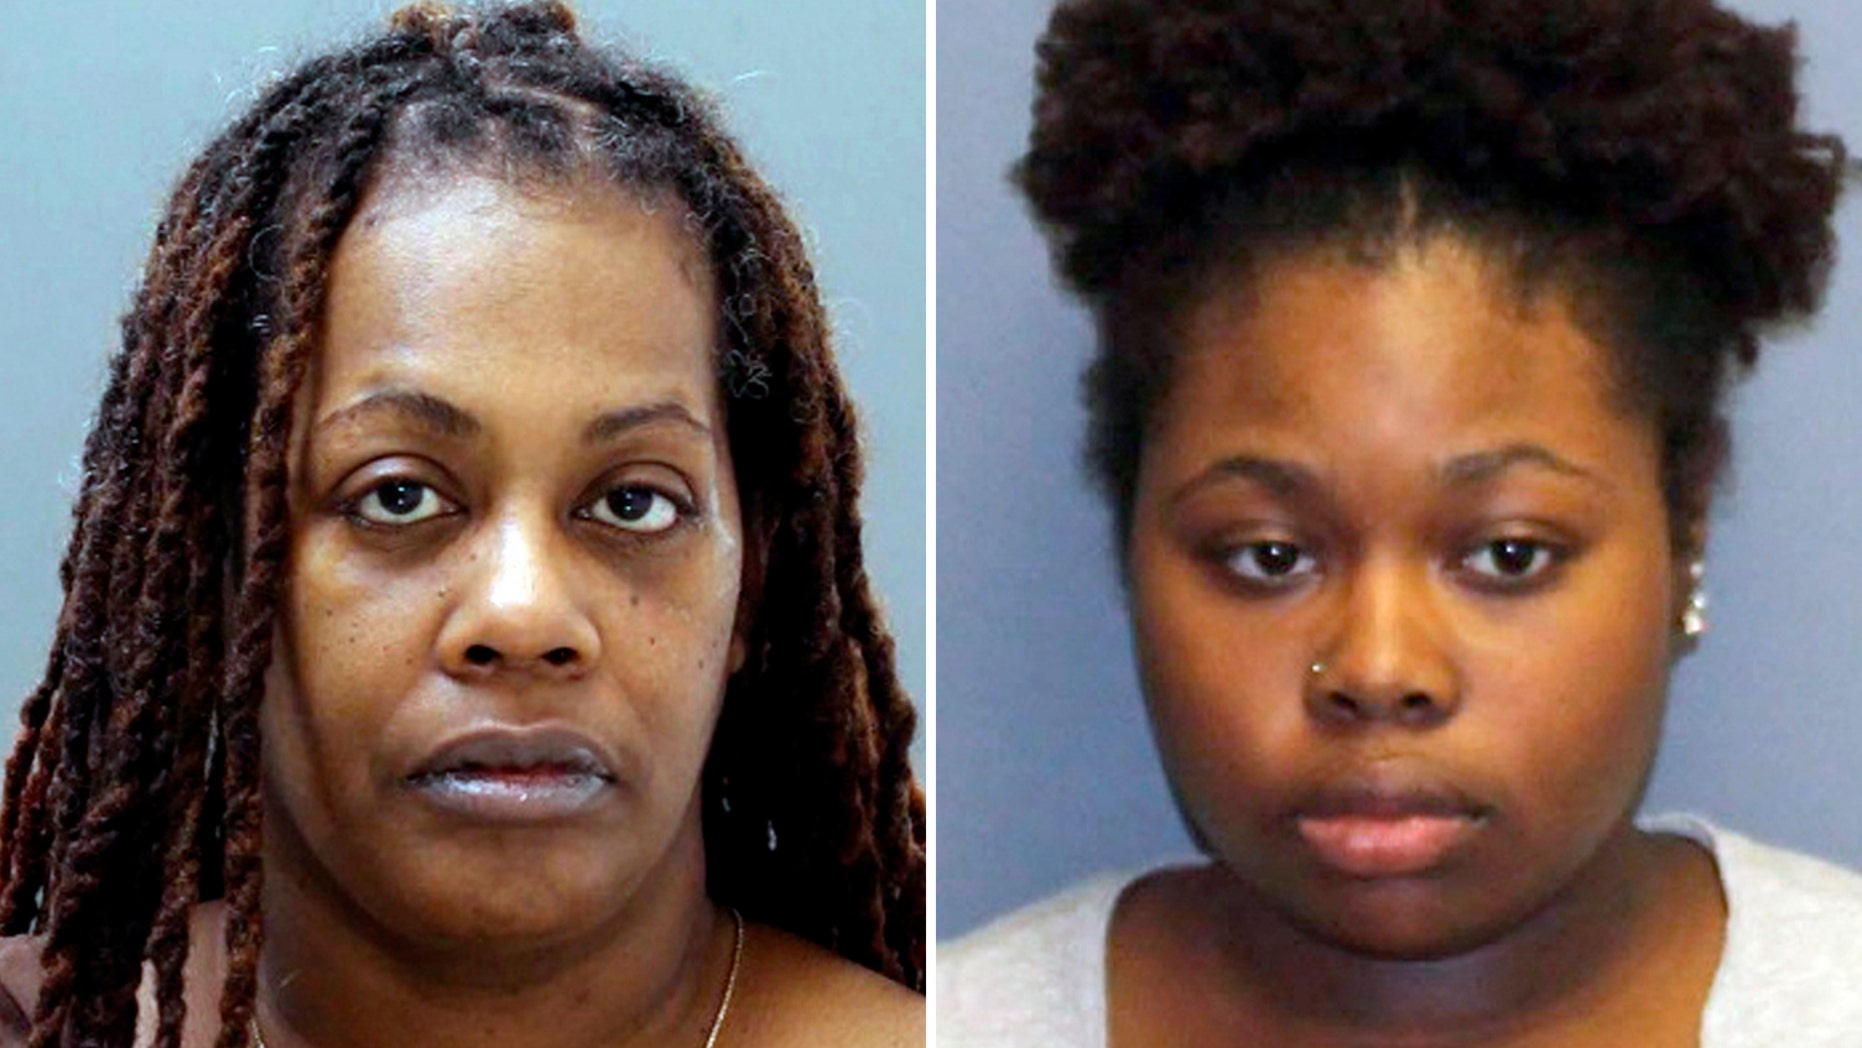 These photos provided by the Bucks County District Attorney's Office on Tuesday February 26, 2019 show Shana (left) and his teenage daughter Dominique Decret. According to the authorities, they have both been charged with homicide for the death of five members of their family, including three children, in a suburban apartment complex in Philadelphia. (Bucks County Attorney's Office via AP)